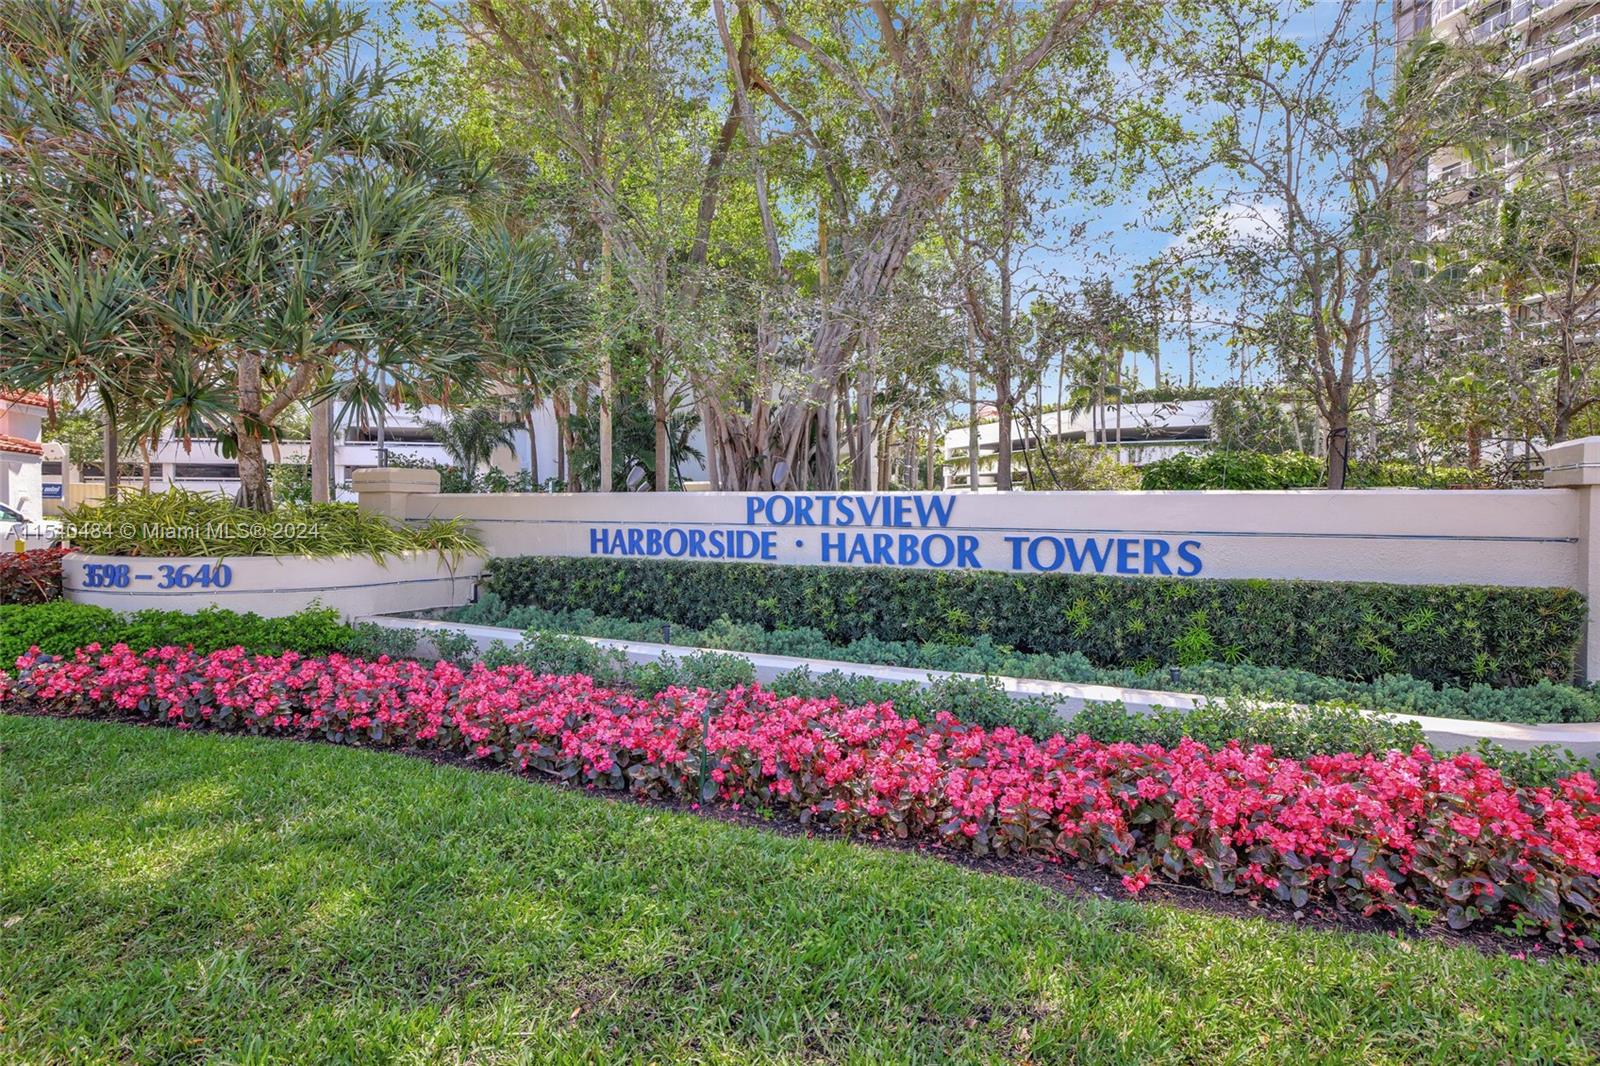 3598 Yacht Club Dr Unit 703, Aventura, Florida, 33180, United States, 3 Bedrooms Bedrooms, ,2 BathroomsBathrooms,Residential,For Sale,3598 Yacht Club Dr Unit 703,1478792